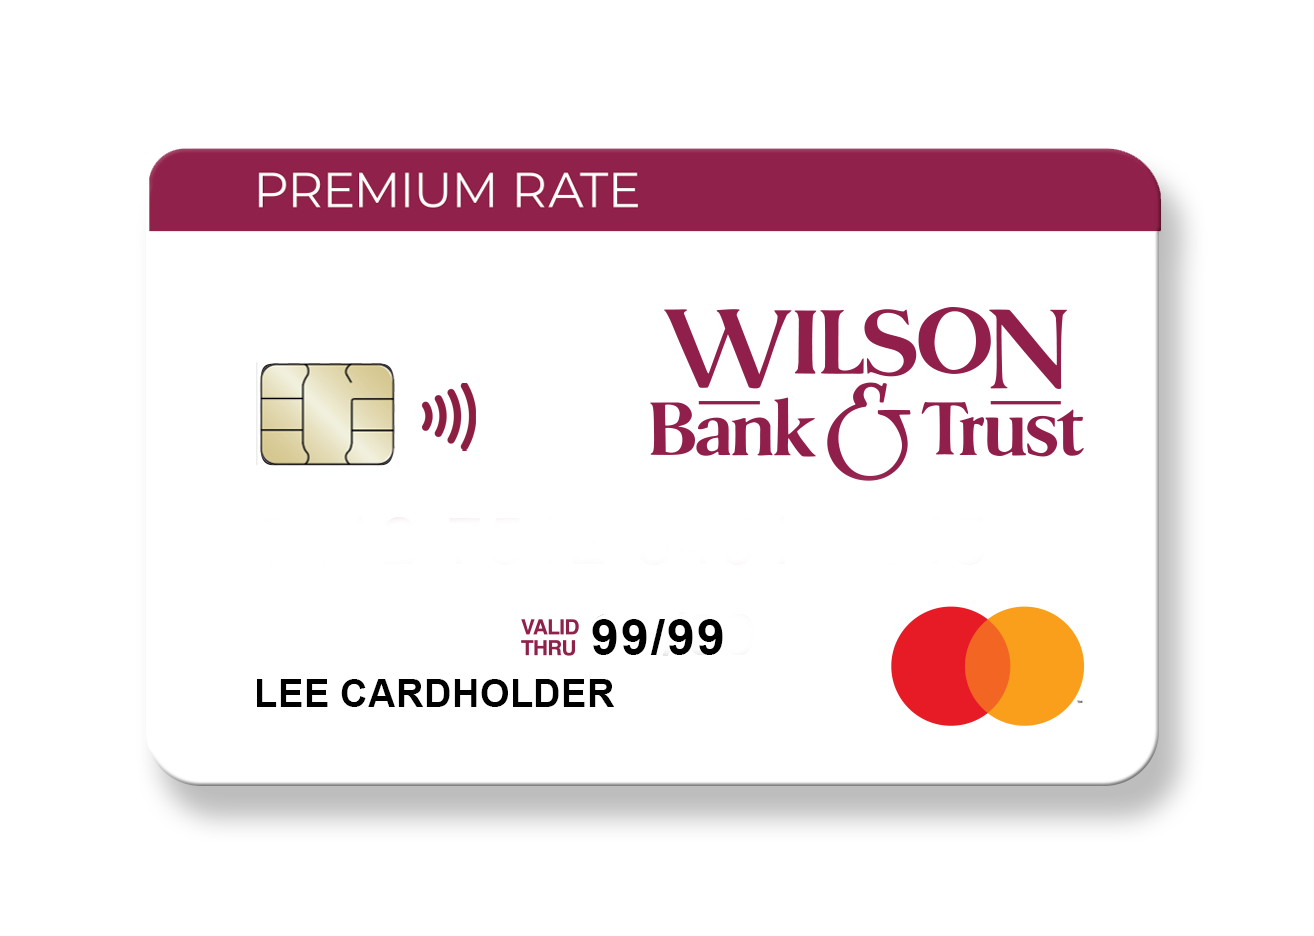 An image of the Wilson Bank & Trust Premium Rate credit card.